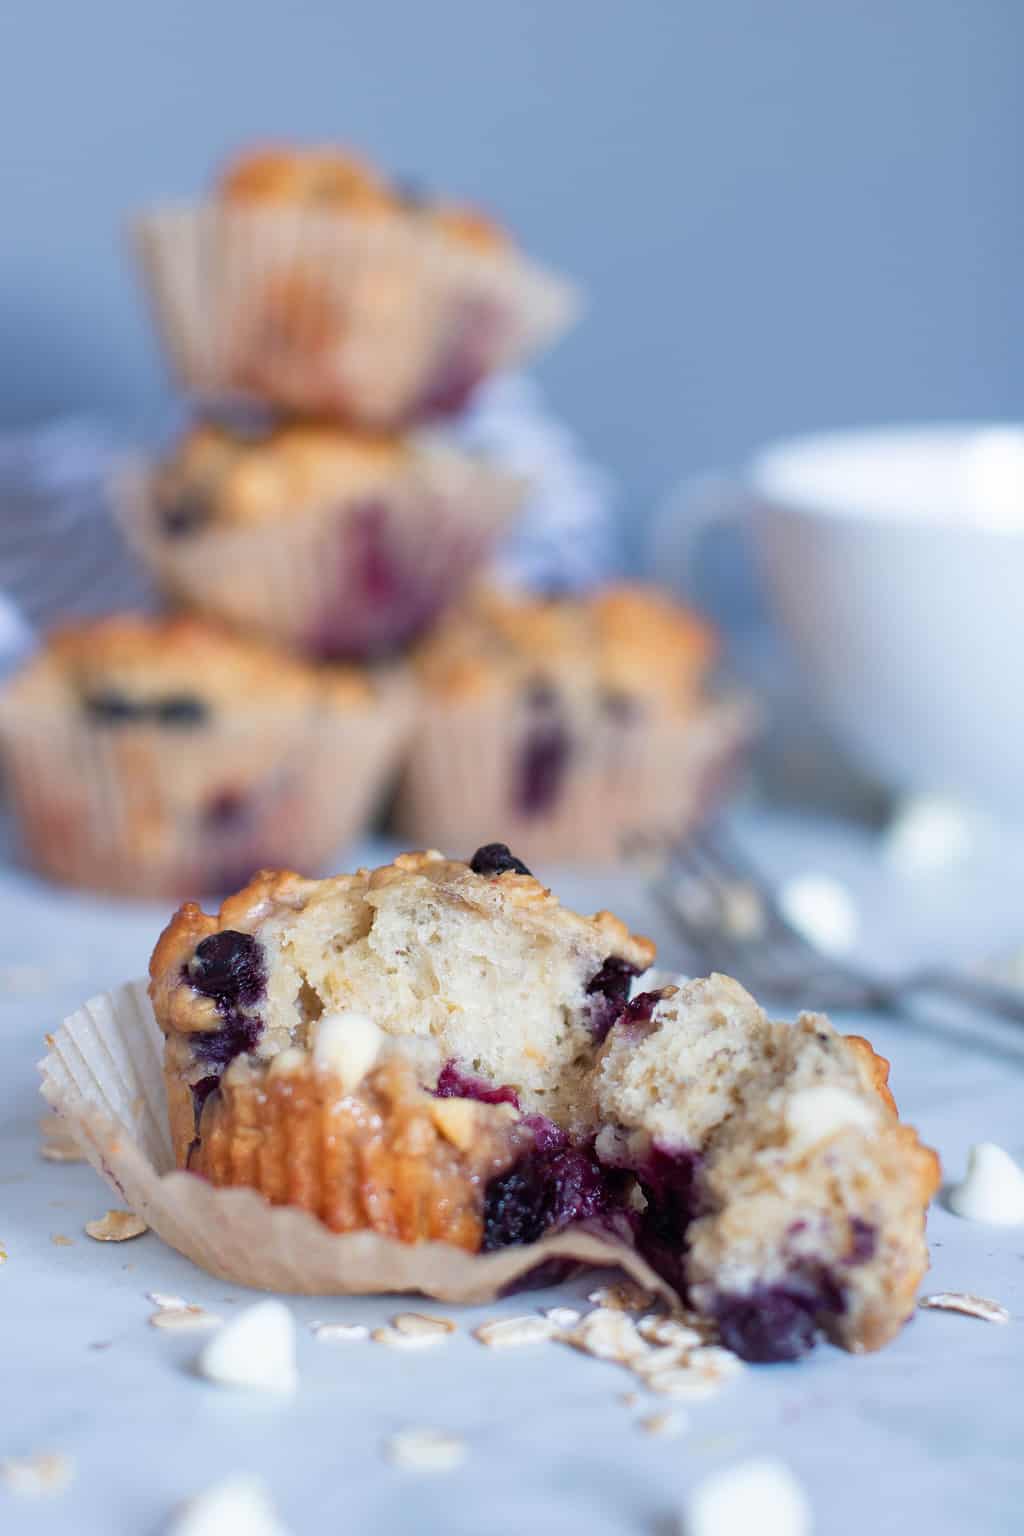 Blueberry Oatmeal White Chocolate Muffin that\'s been pulled apart.